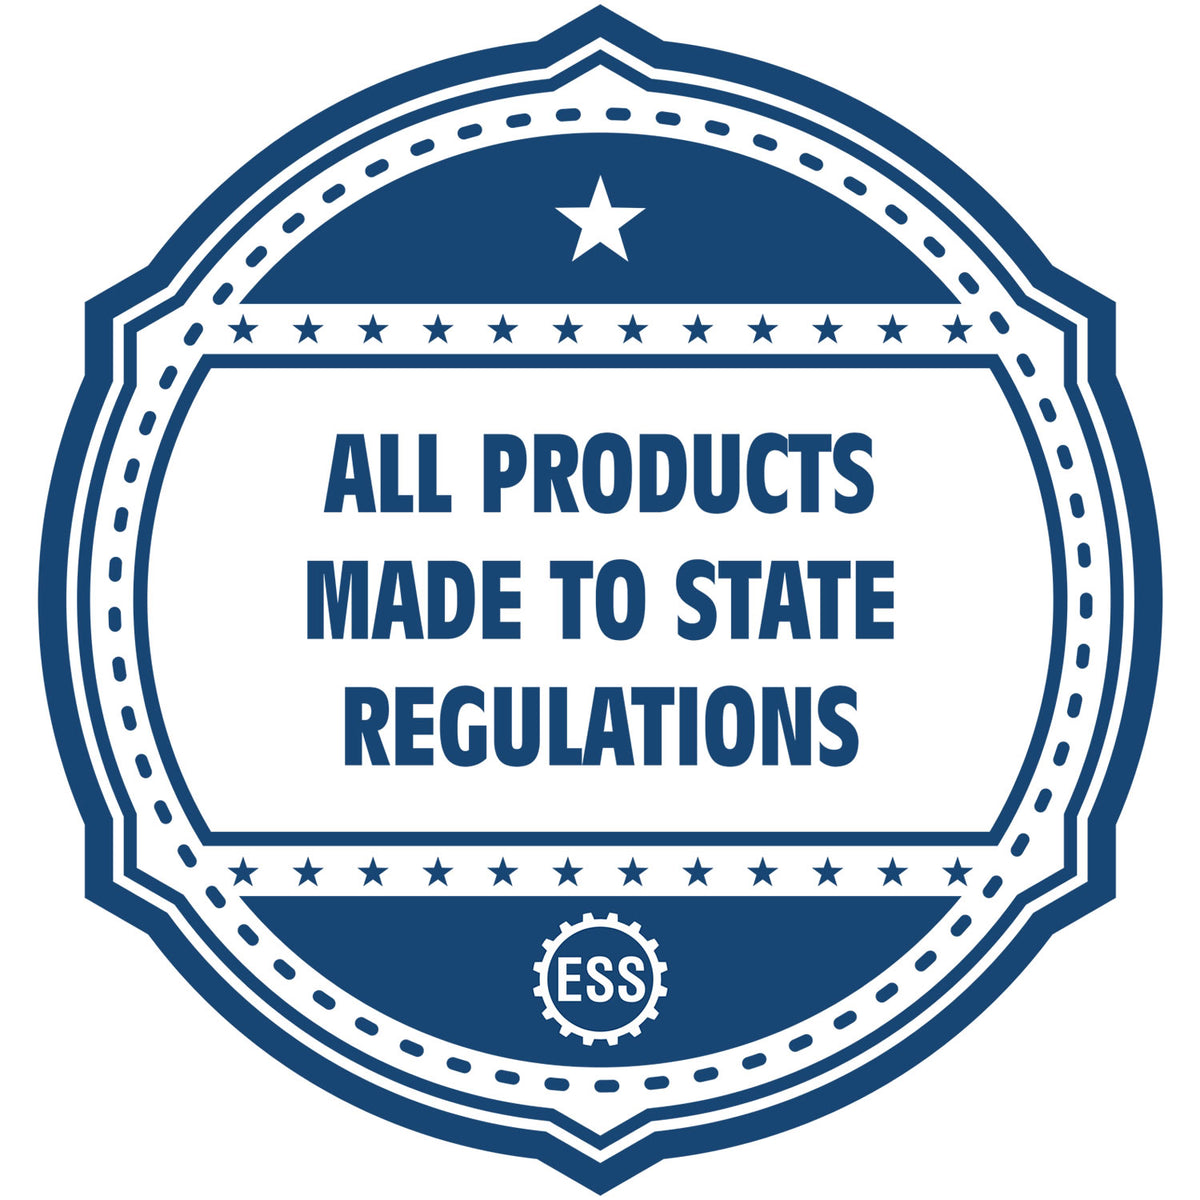 A blue icon or badge for the Gift Minnesota Engineer Seal showing that this product is made in compliance with state regulations.